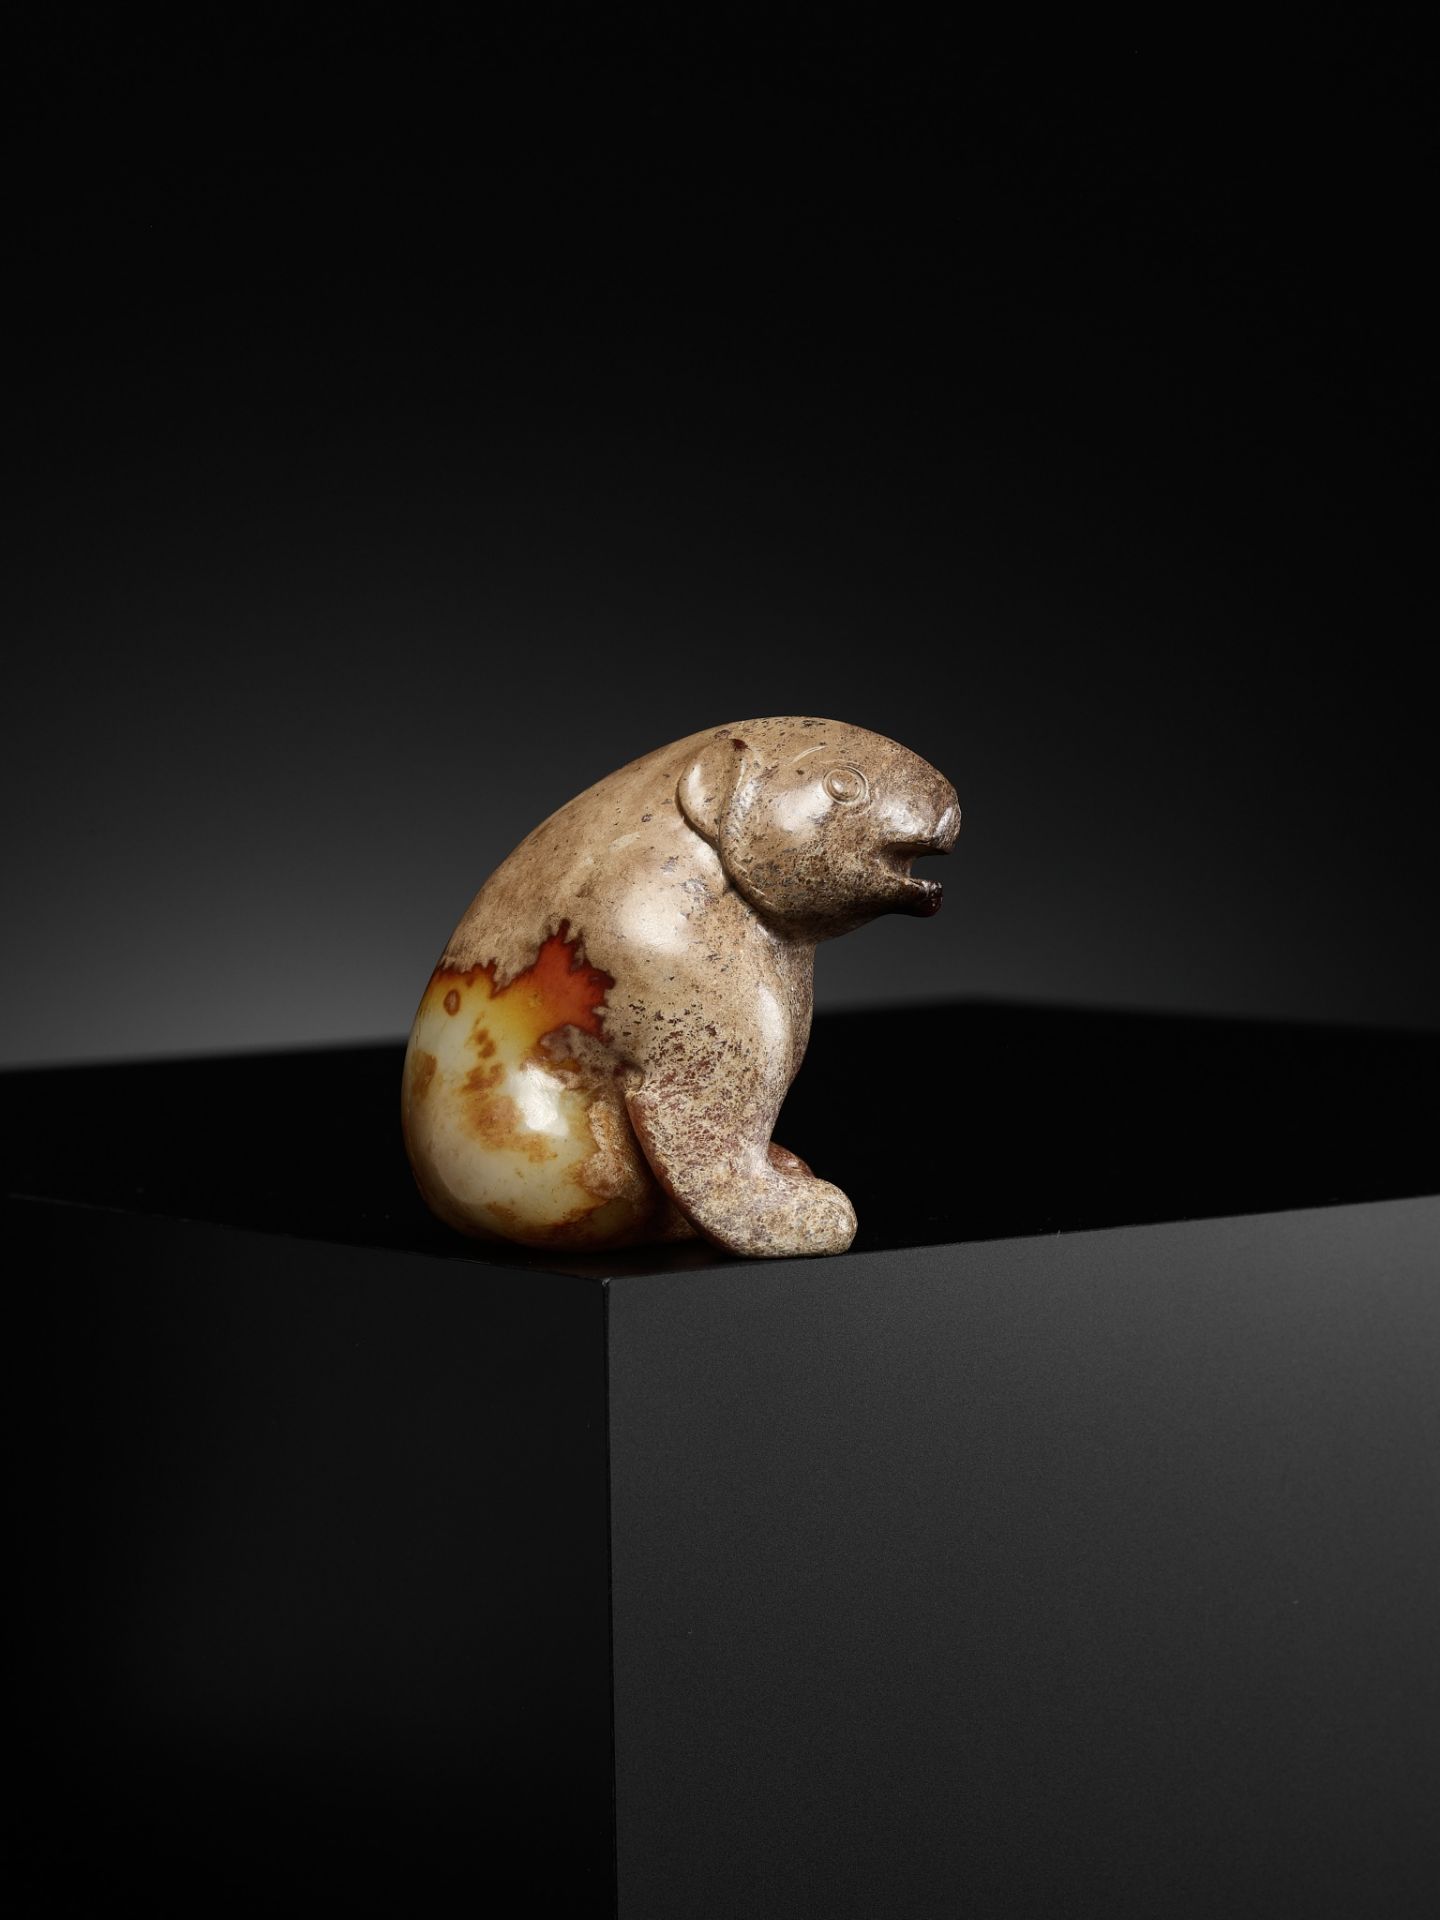 AN EXCEPTIONAL YELLOW JADE FIGURE OF A BEAR, HUANGXIONG, HAN DYNASTY, CHINA, 202 BC - 220 AD - Bild 9 aus 19